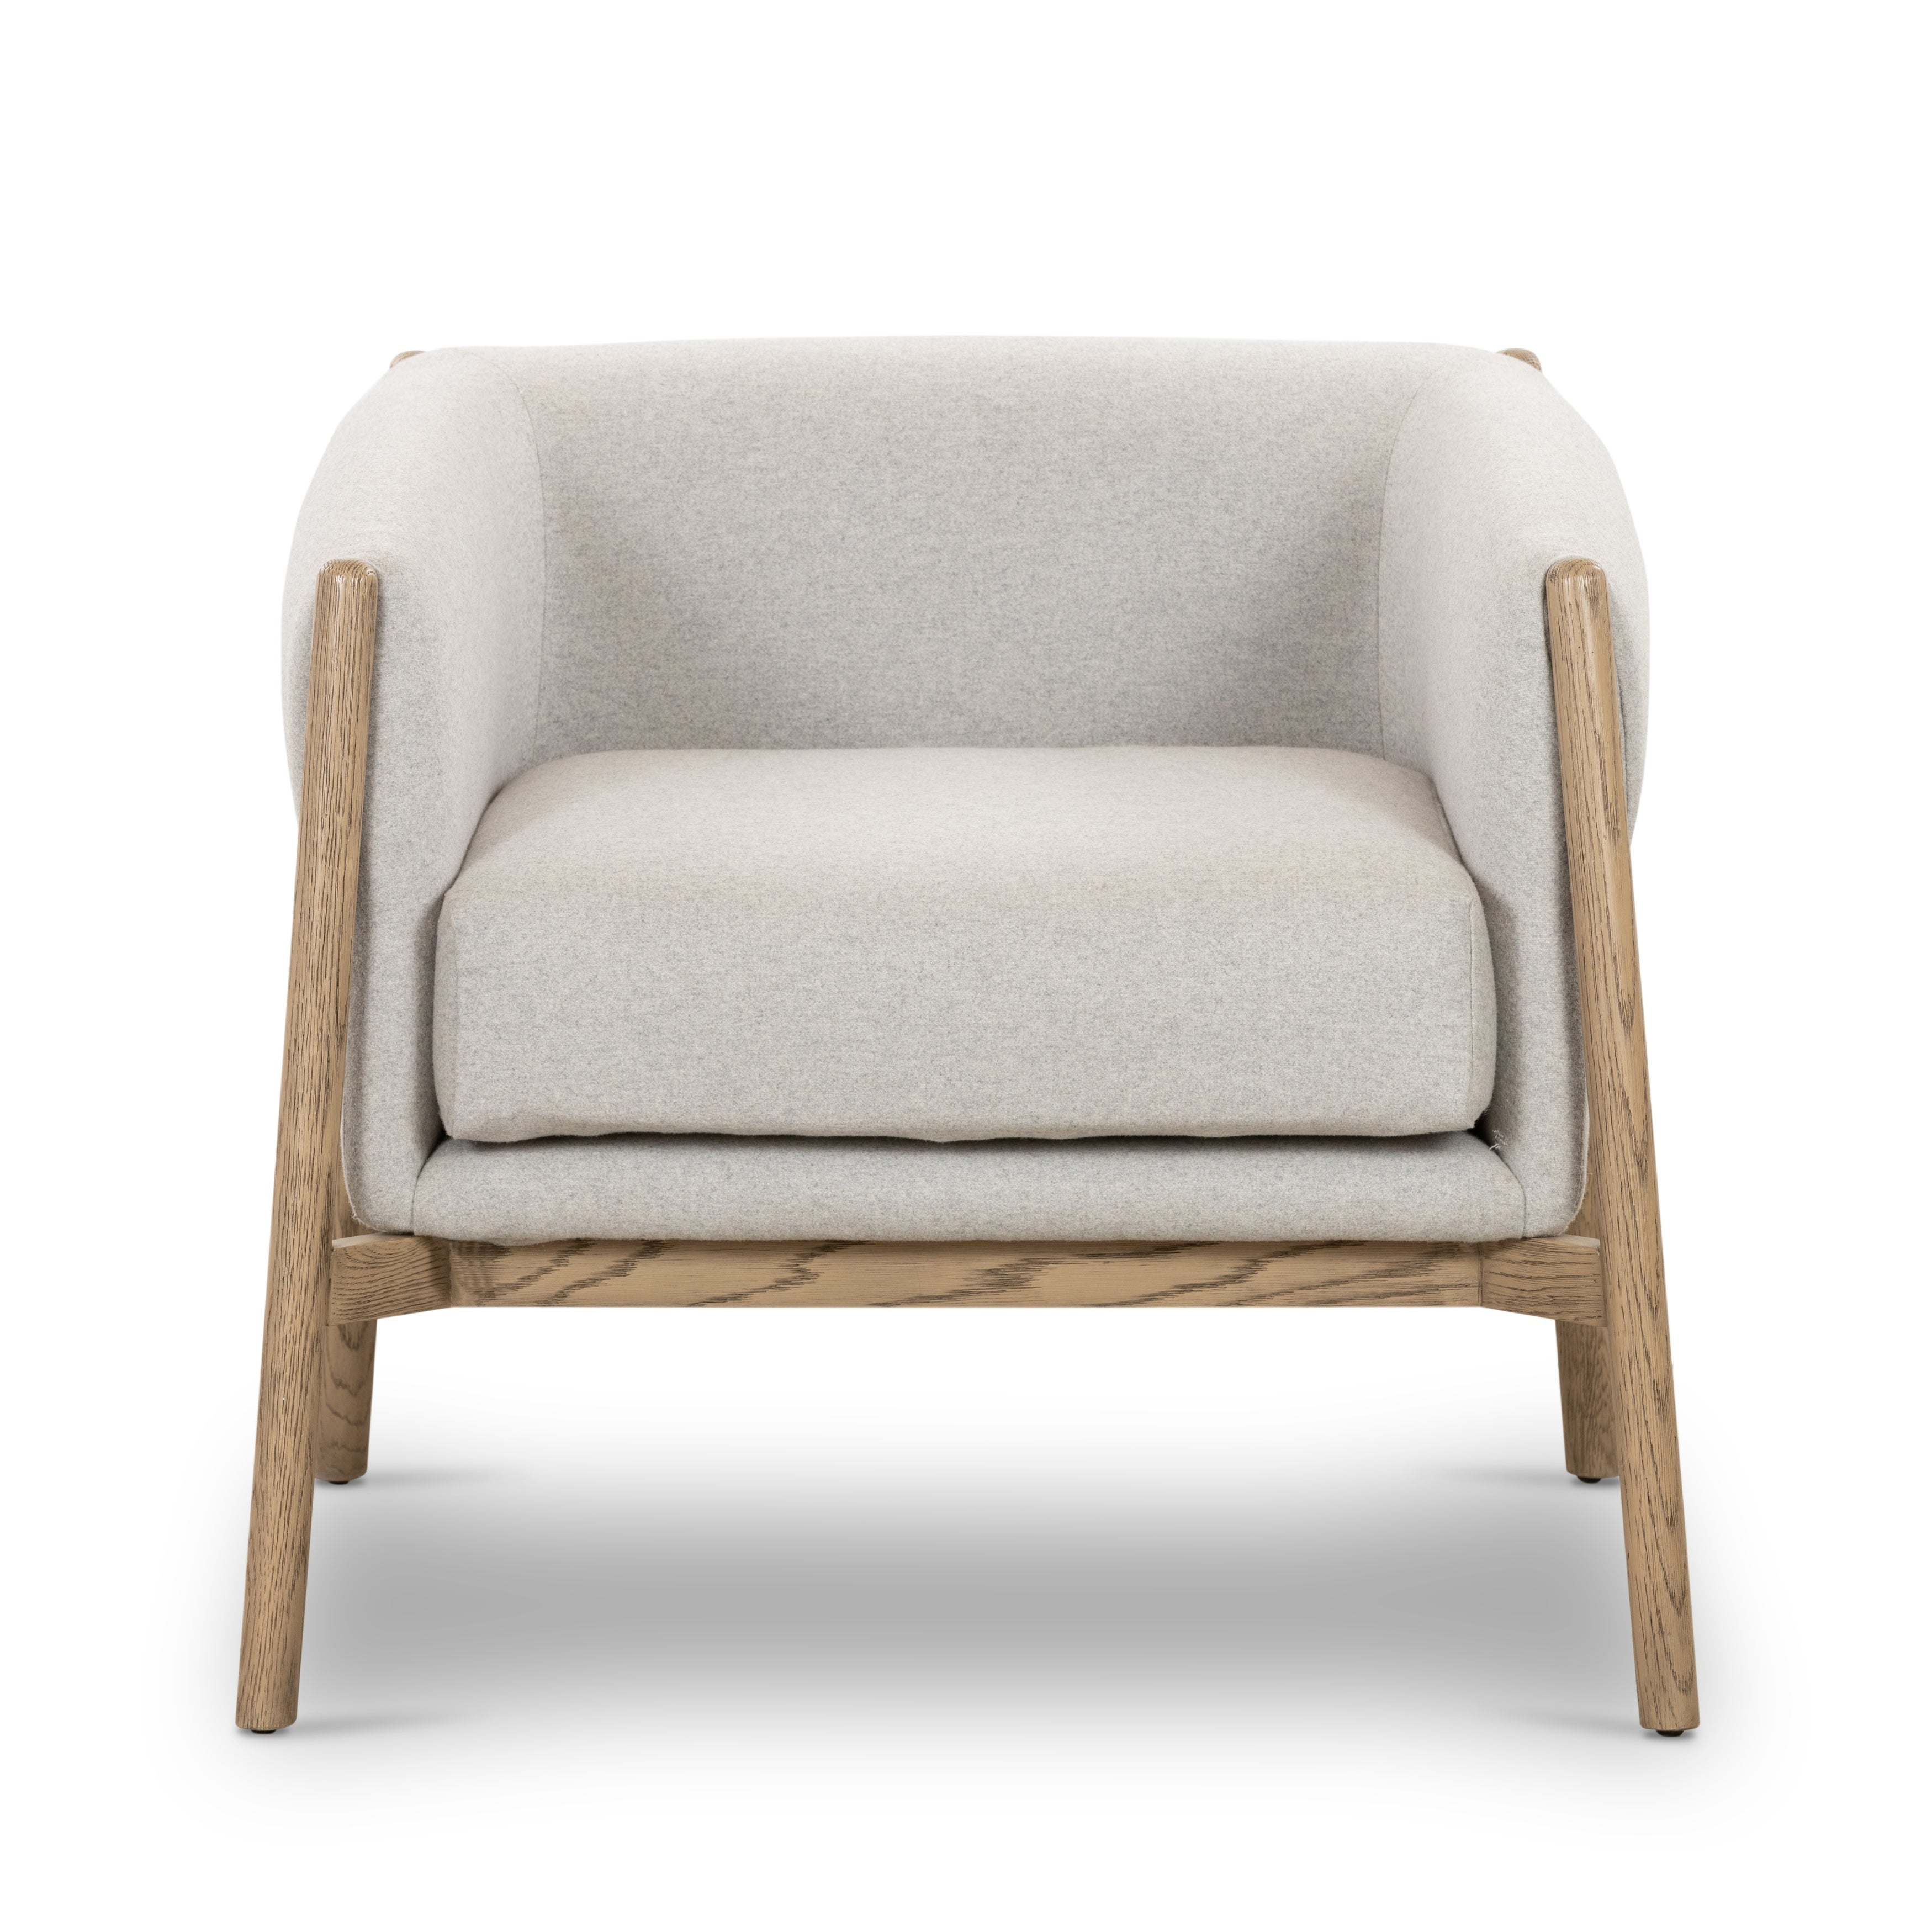 Soft and beautiful, this Idris Chair - Elite Stone is everything. The slightly splayed legs give a subtle intrigue, while the solid oak frame cradles comfy seating of regenerated wool in a light stone hue.   Overall Dimensions: 32.75"w x 32.75"d x 27.25"h